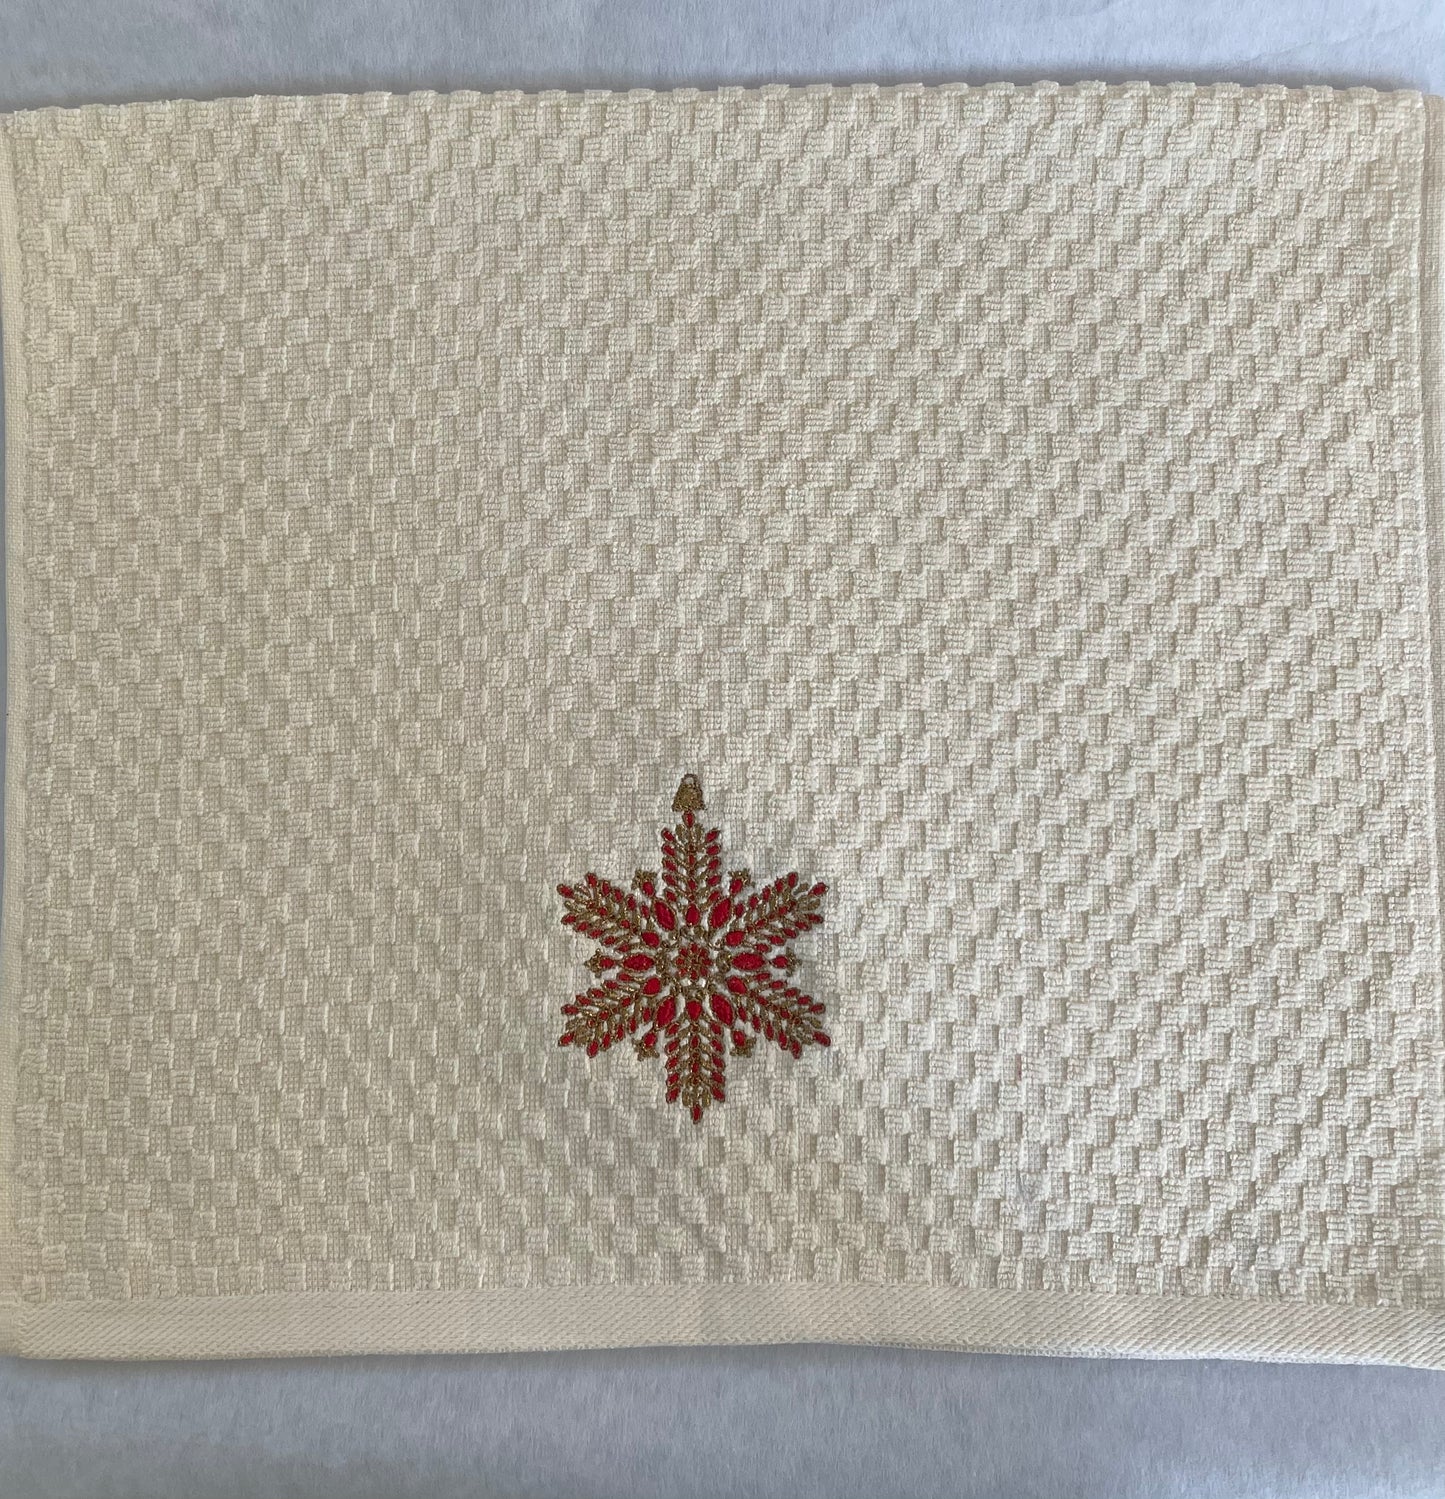 Exquisite Snowflake Embroidered Kitchen Towel